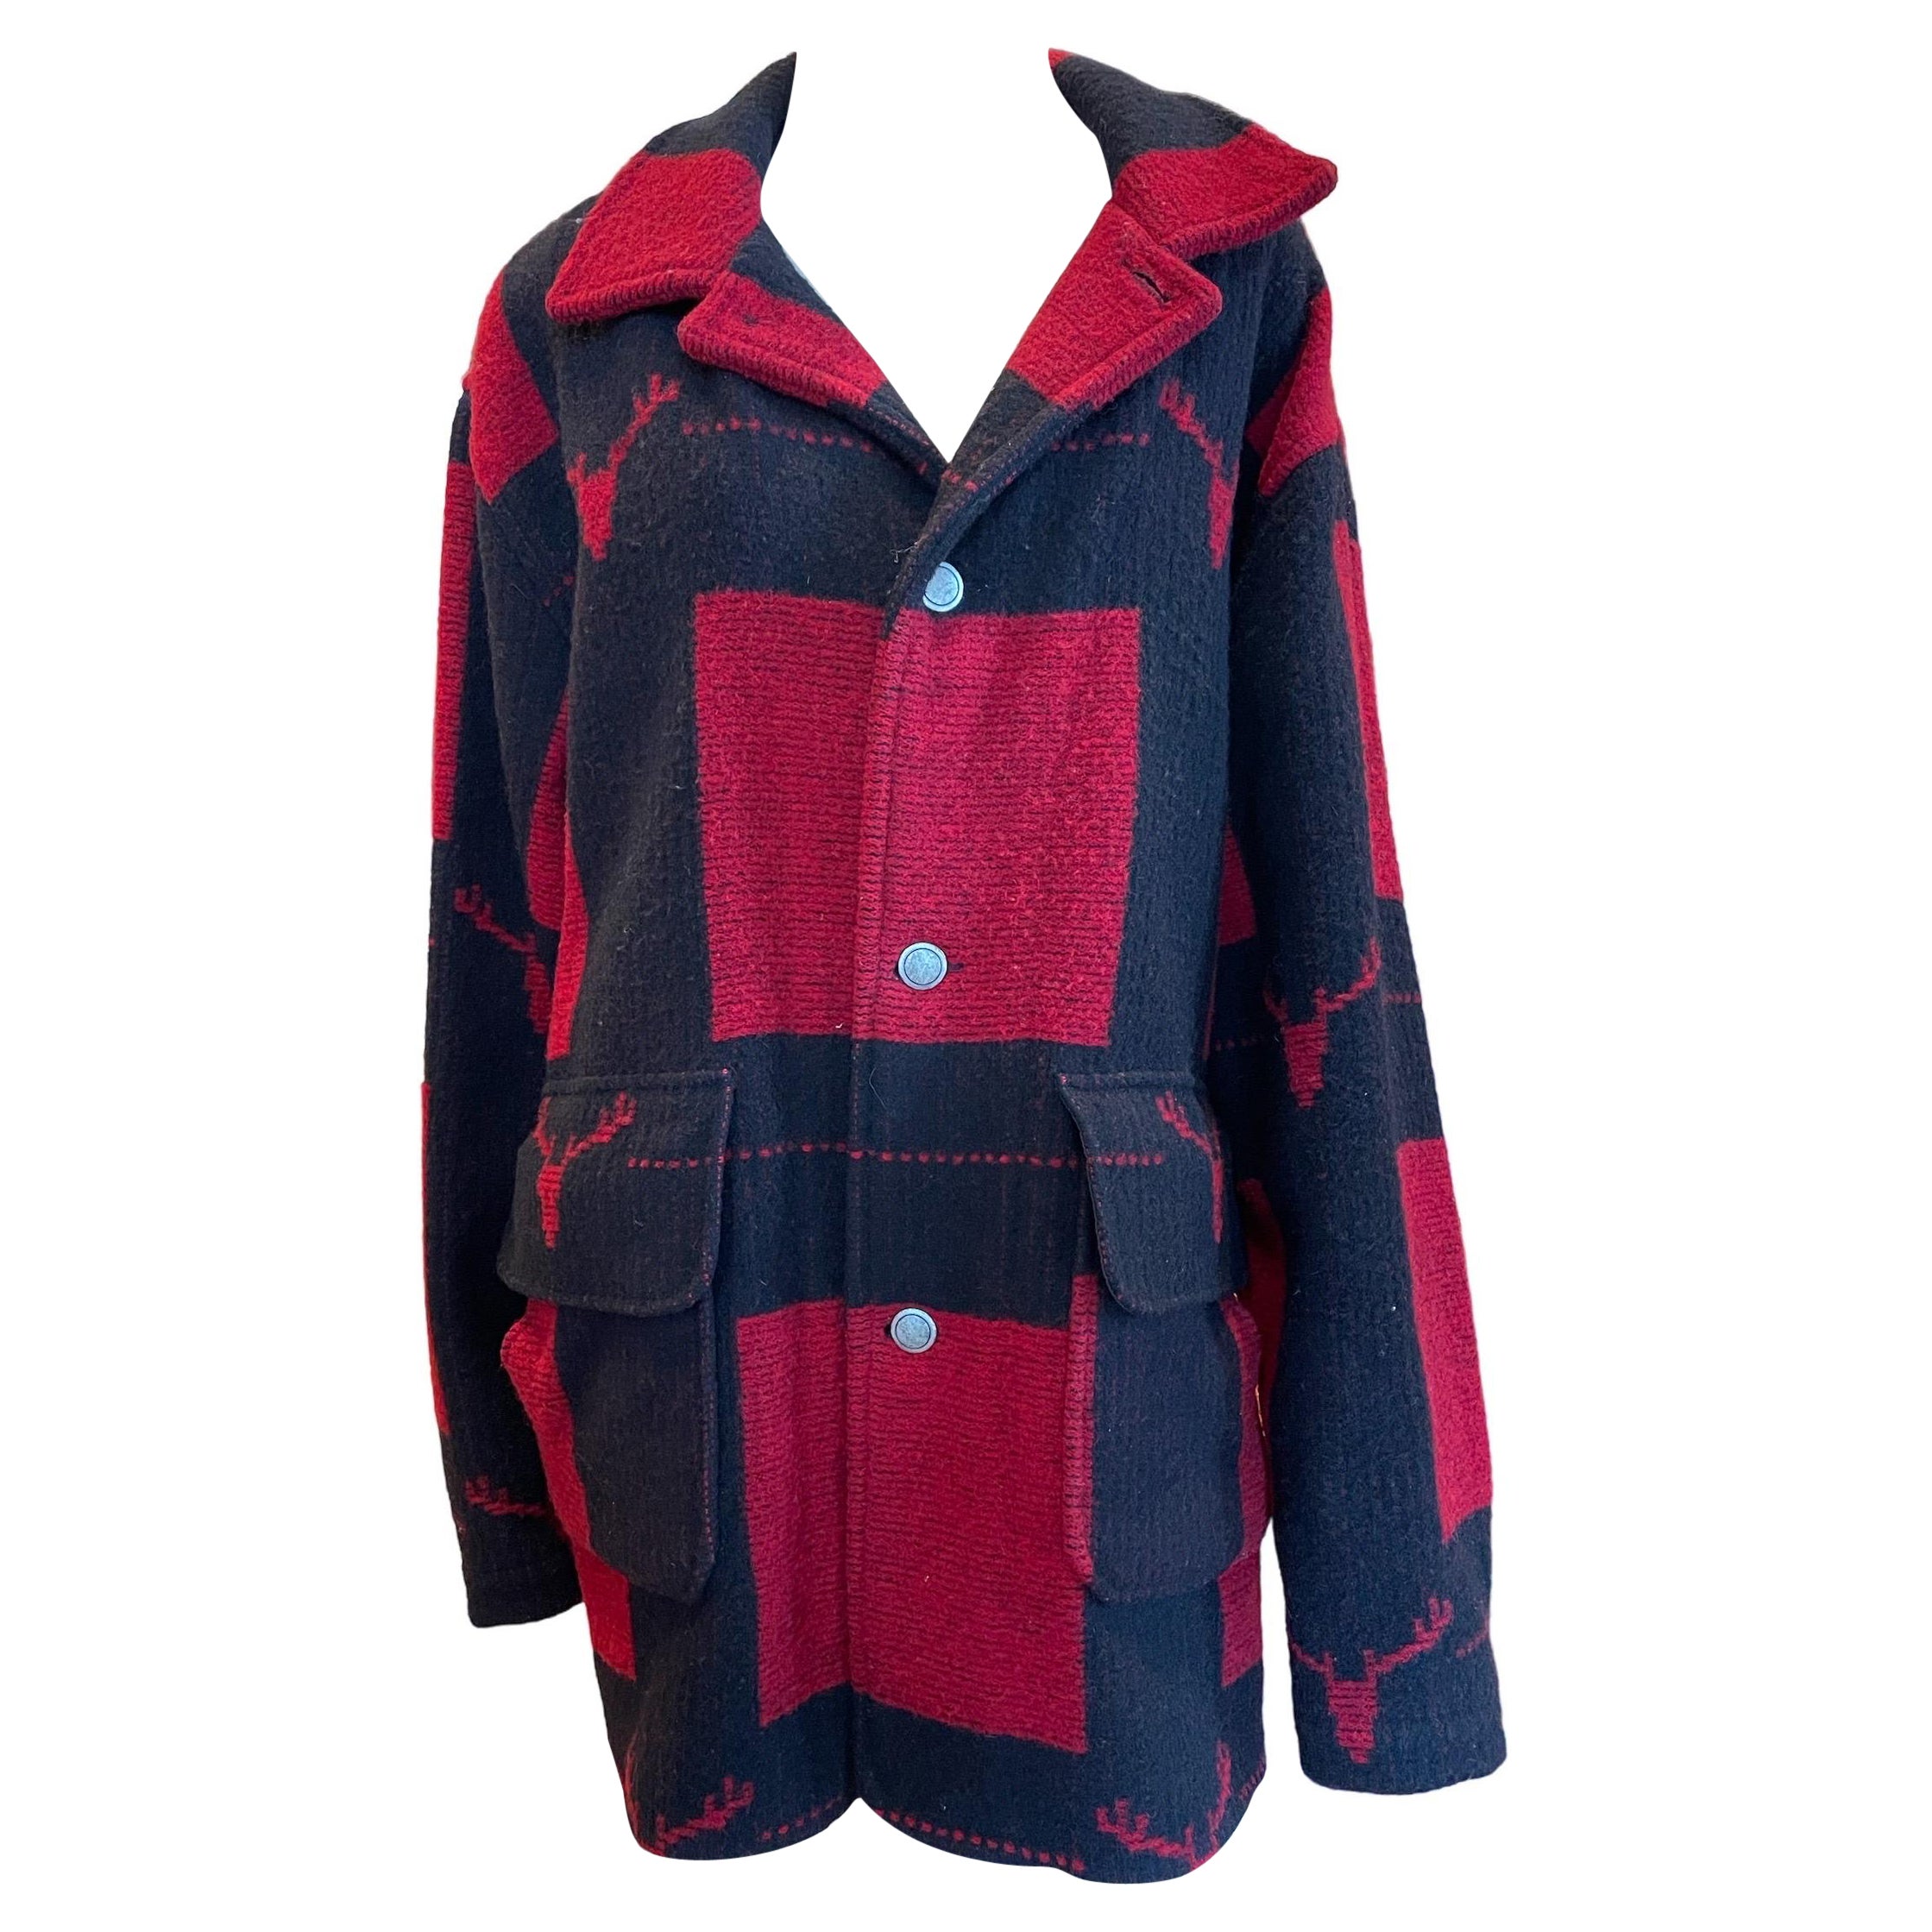 1980s Woolrich Black and Red Plaid Hunting Jacket